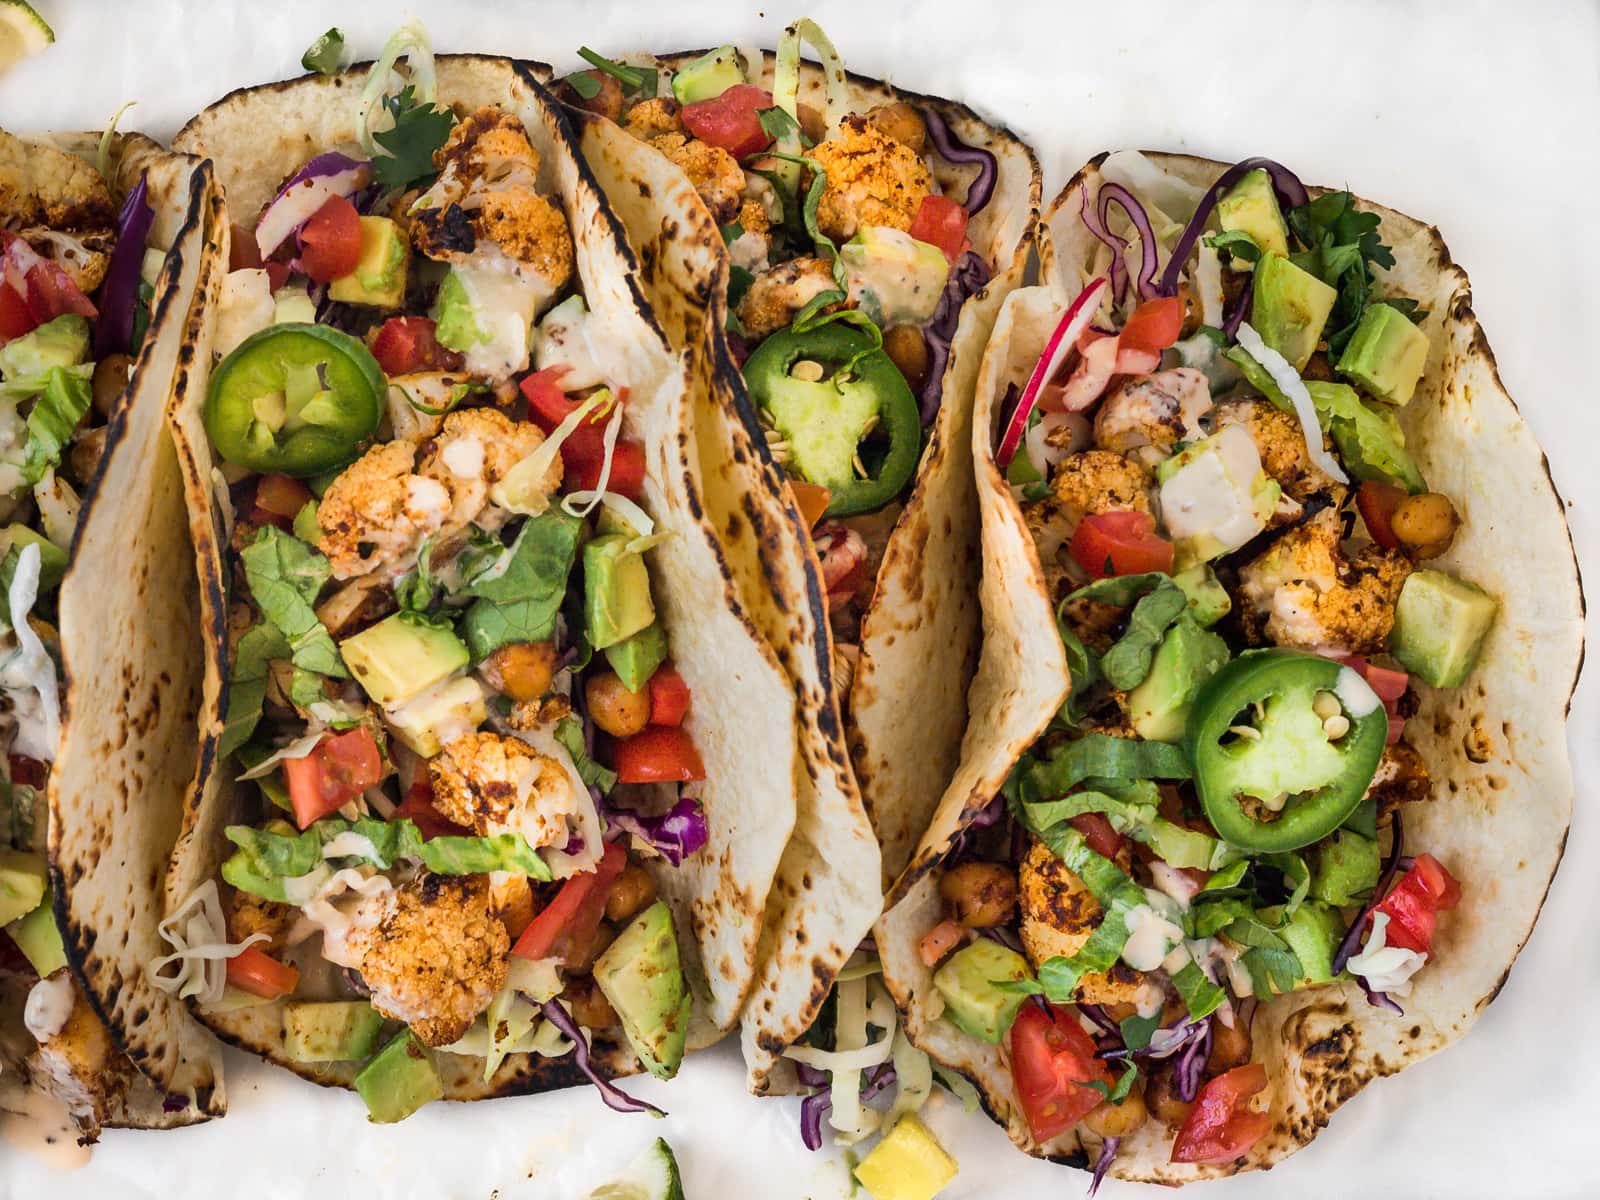 Three large roasted cauliflower and vegetable tacos leaning together on a plate.